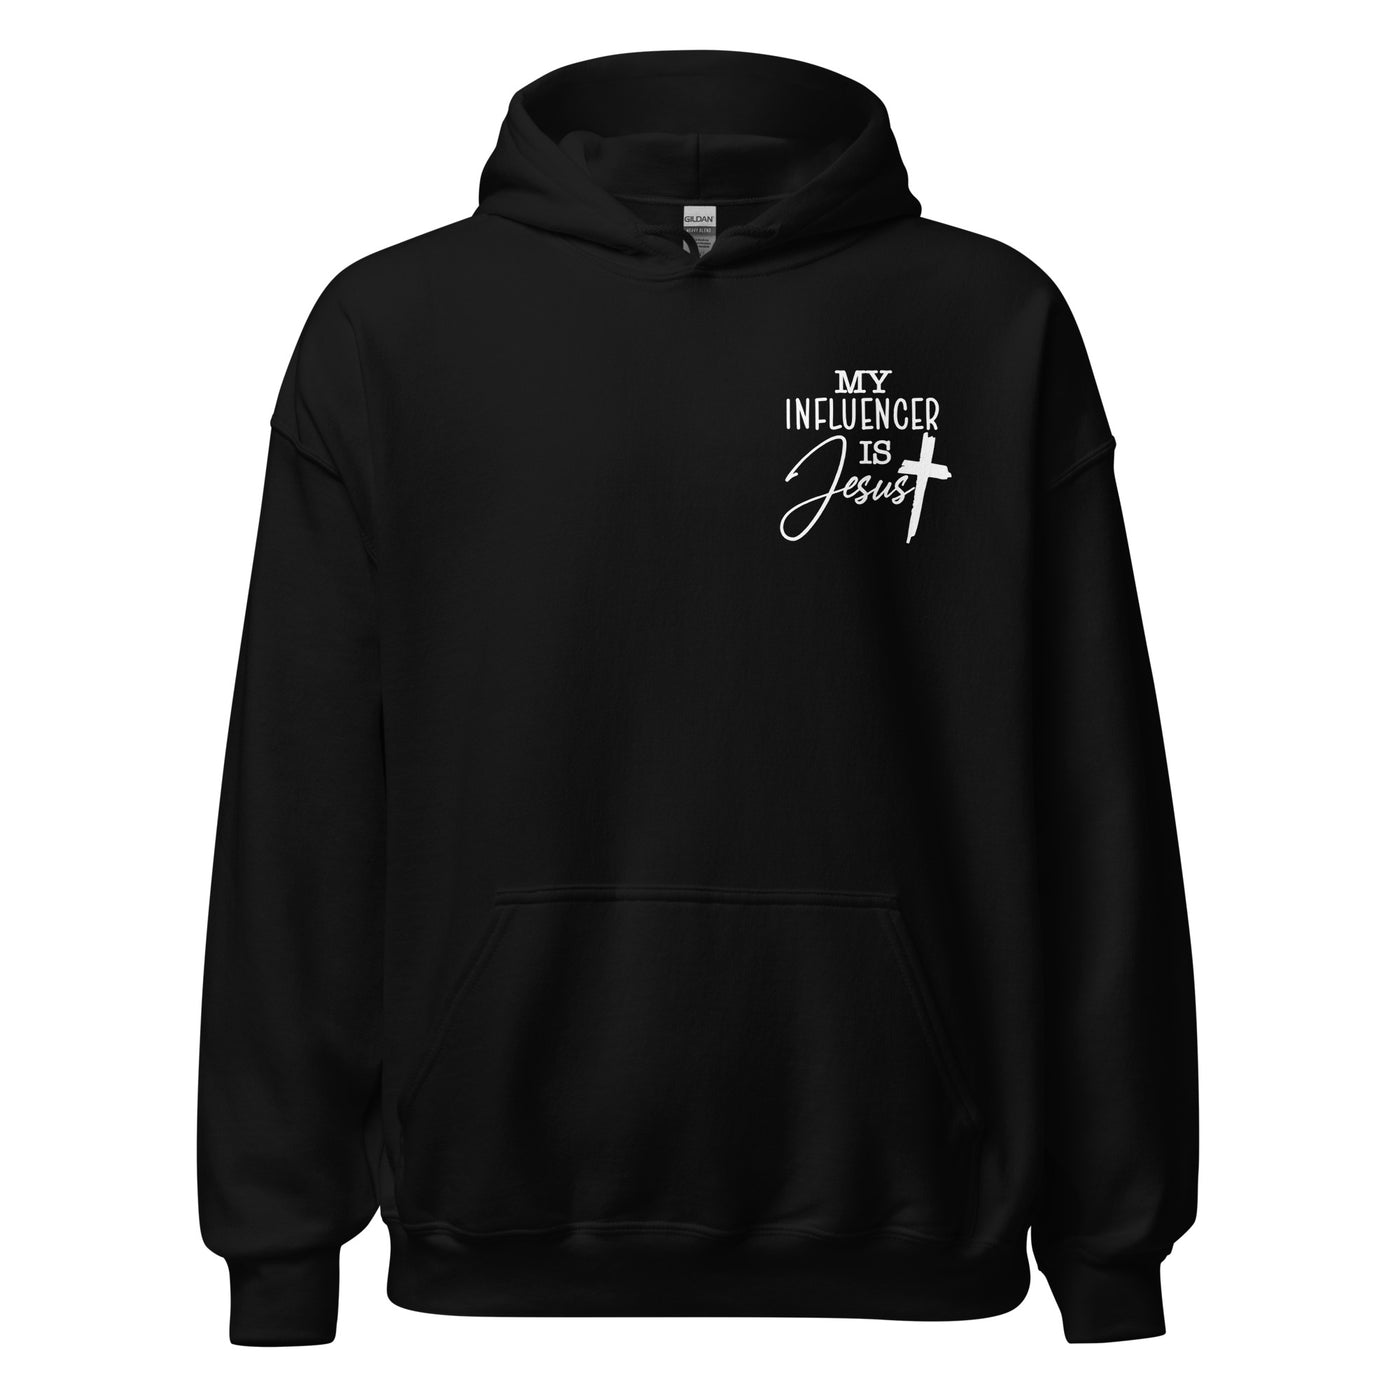 Shop Best Hoodies, T-Shirts and More – Thoughts Unspoken